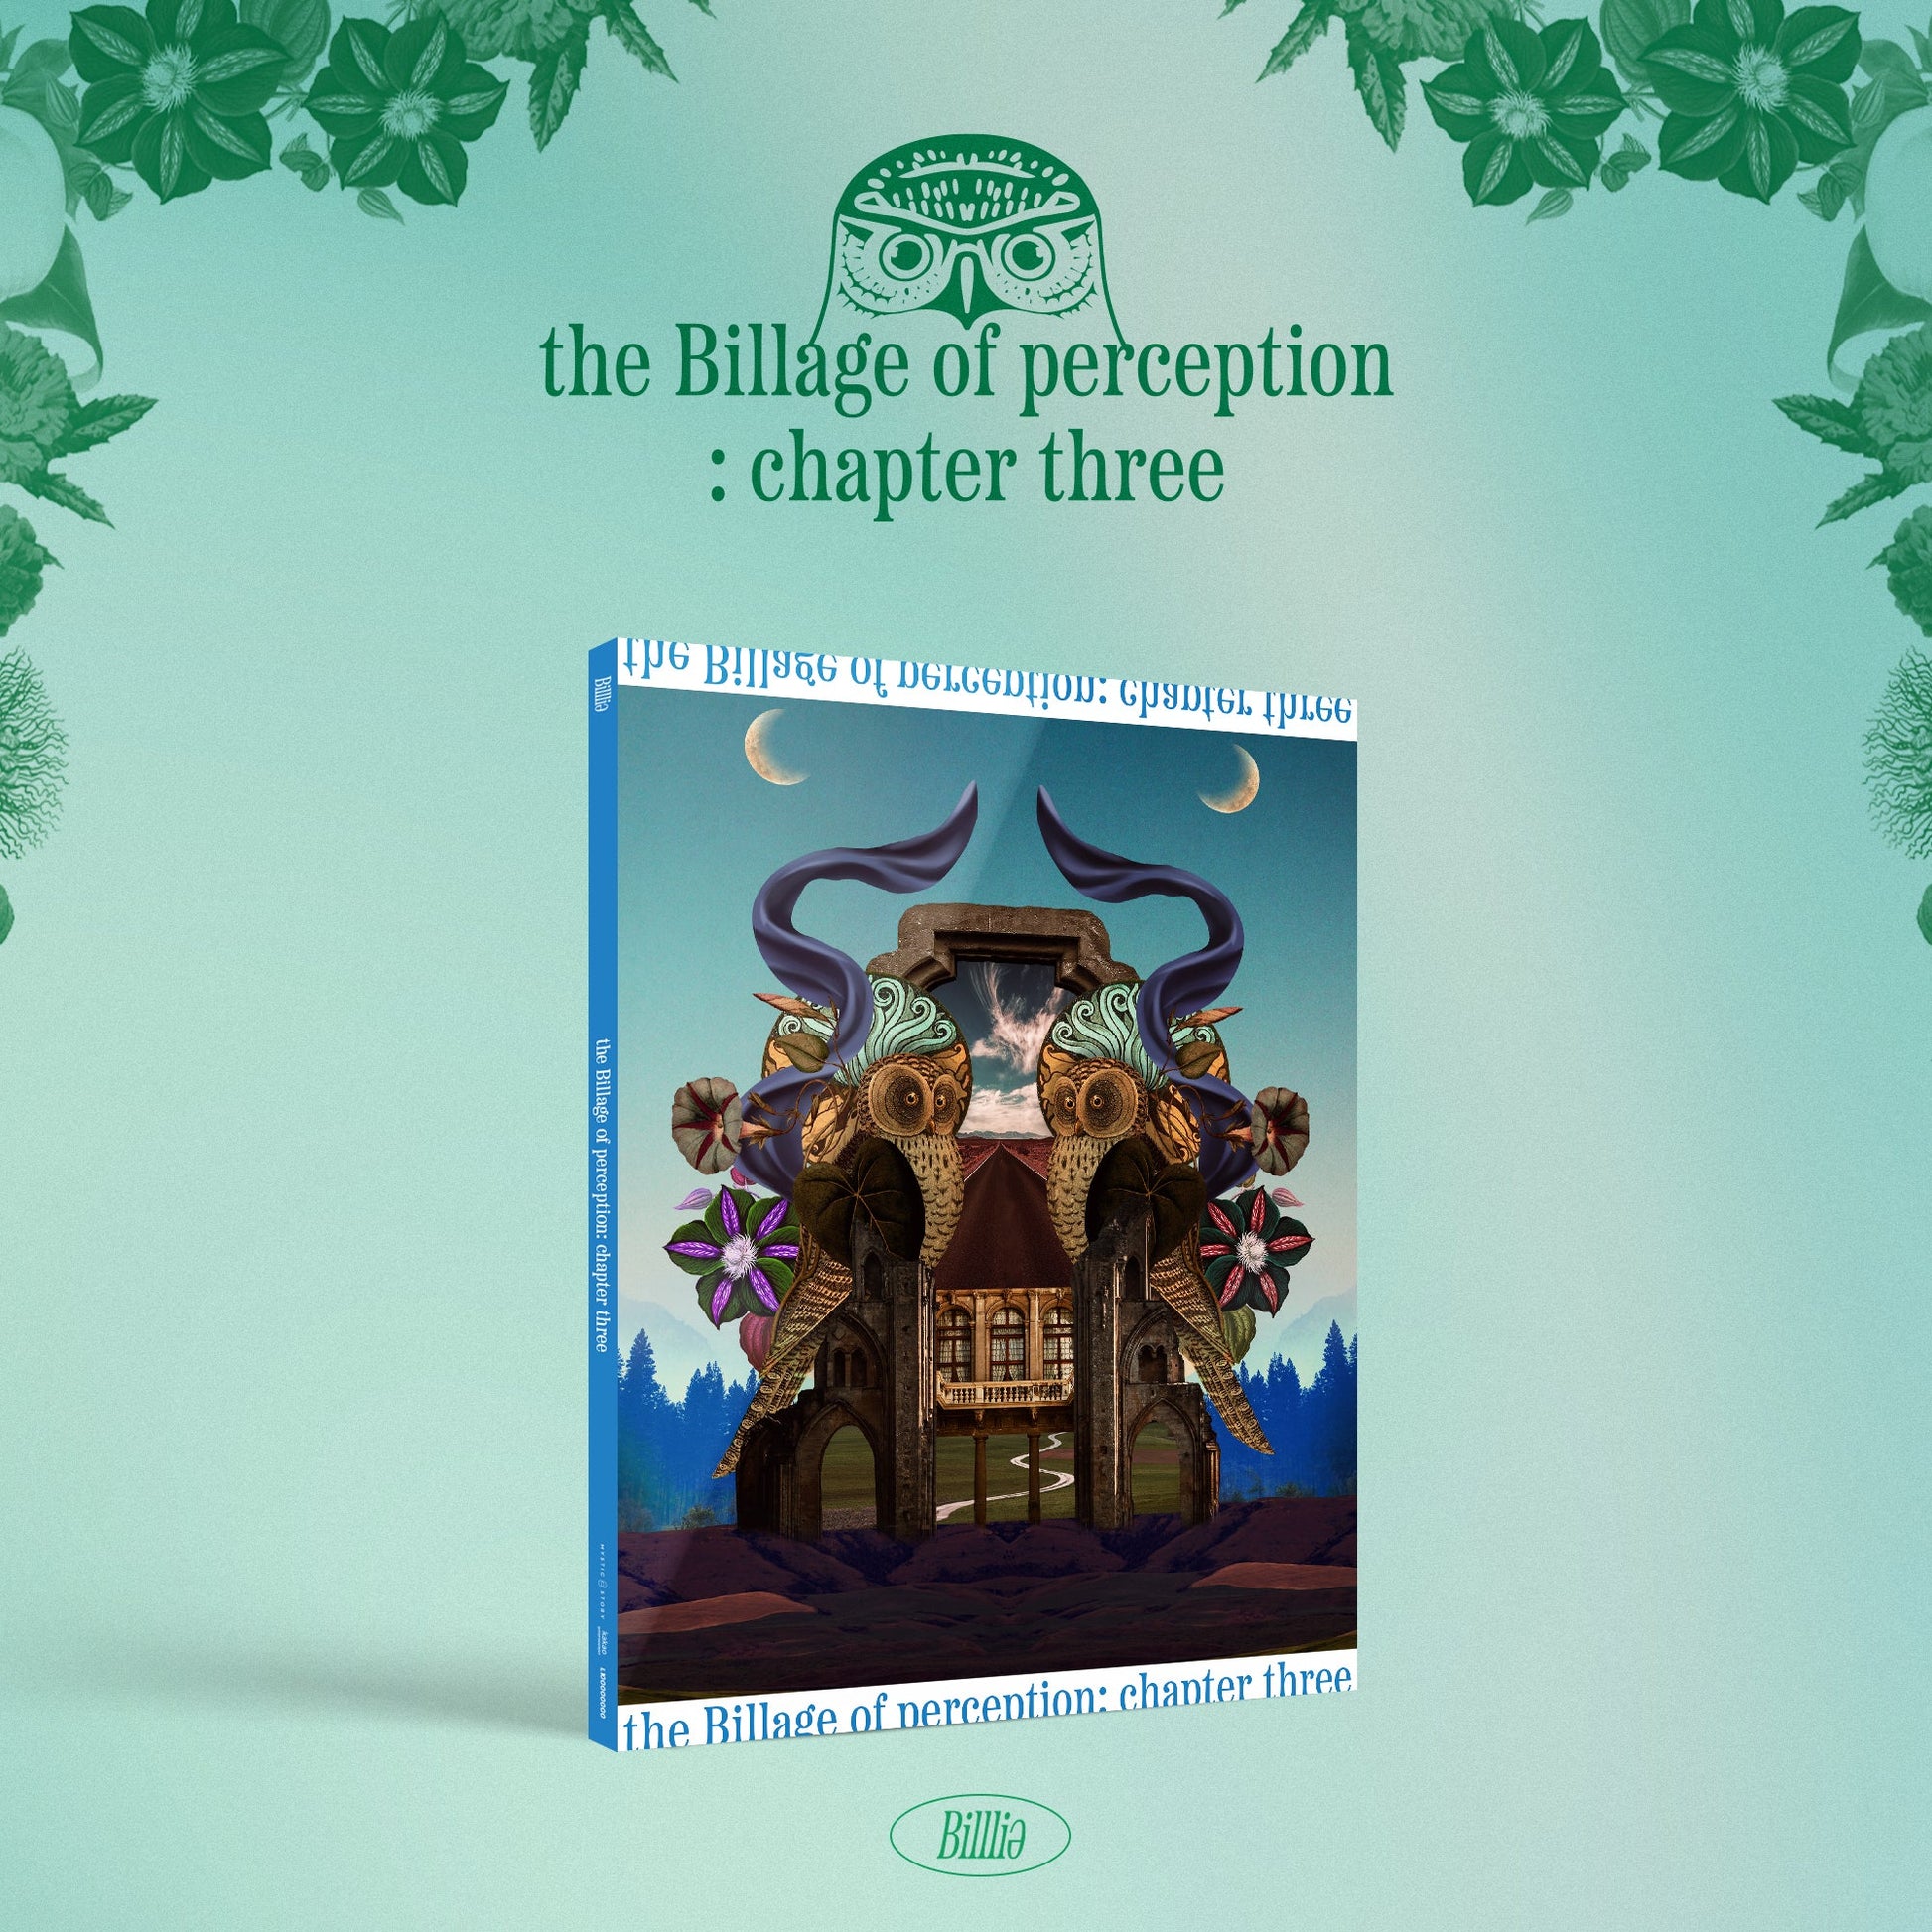 BILLLIE 4TH MINI ALBUM 'THE BILLAGE OF PERCEPTION: CHAPTER THREE' 01:01 AM COLLECTION VERSION COVER